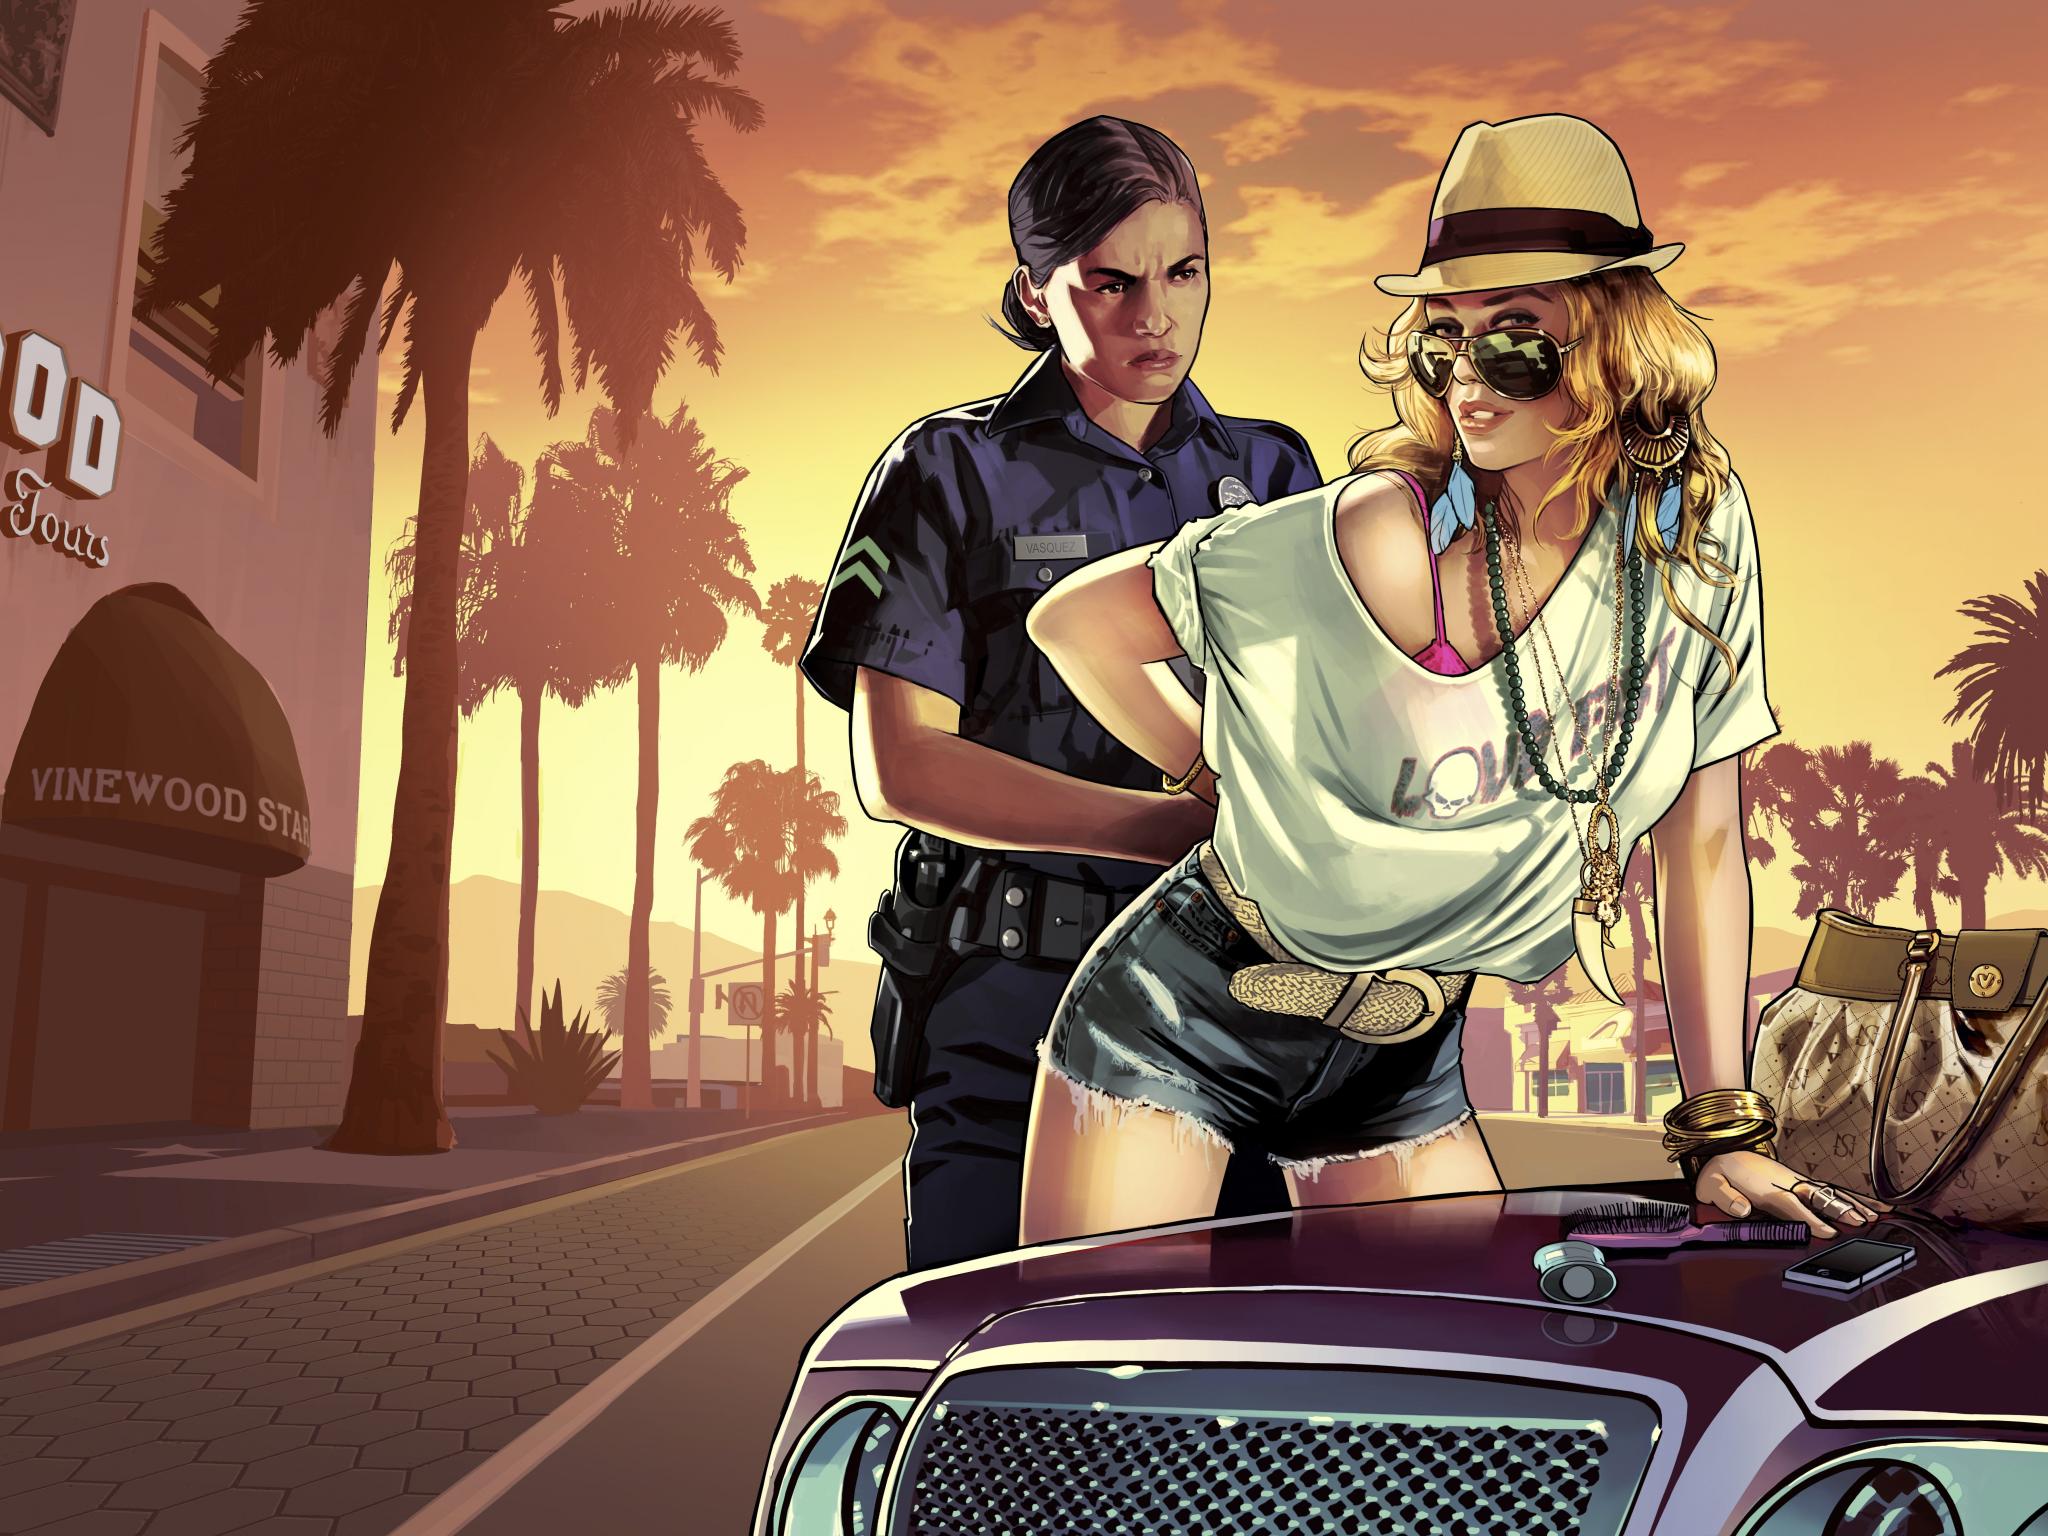  will-grand-theft-auto-6-get-pushed-to-2026-rockstar-in-office-mandate-could-delay-release 